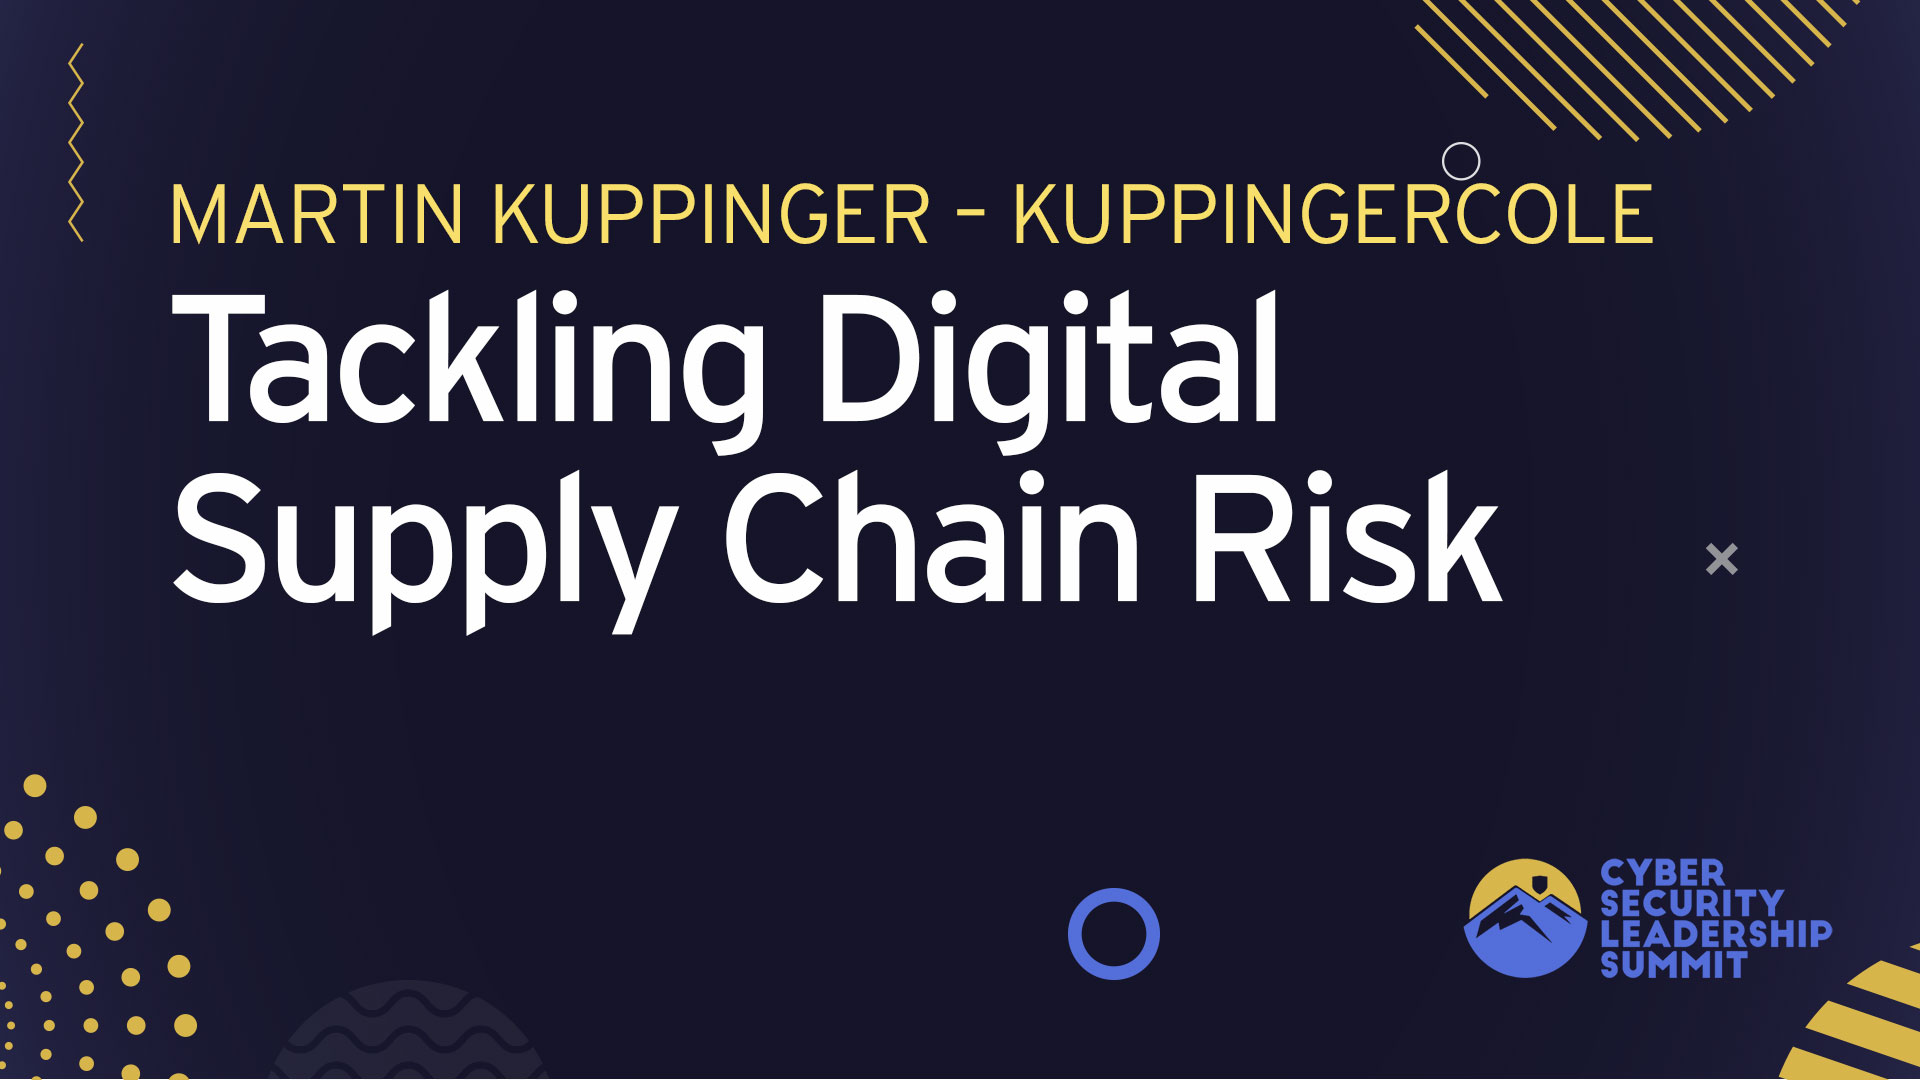 Successfully tackling your Digital Supply Chain Risk